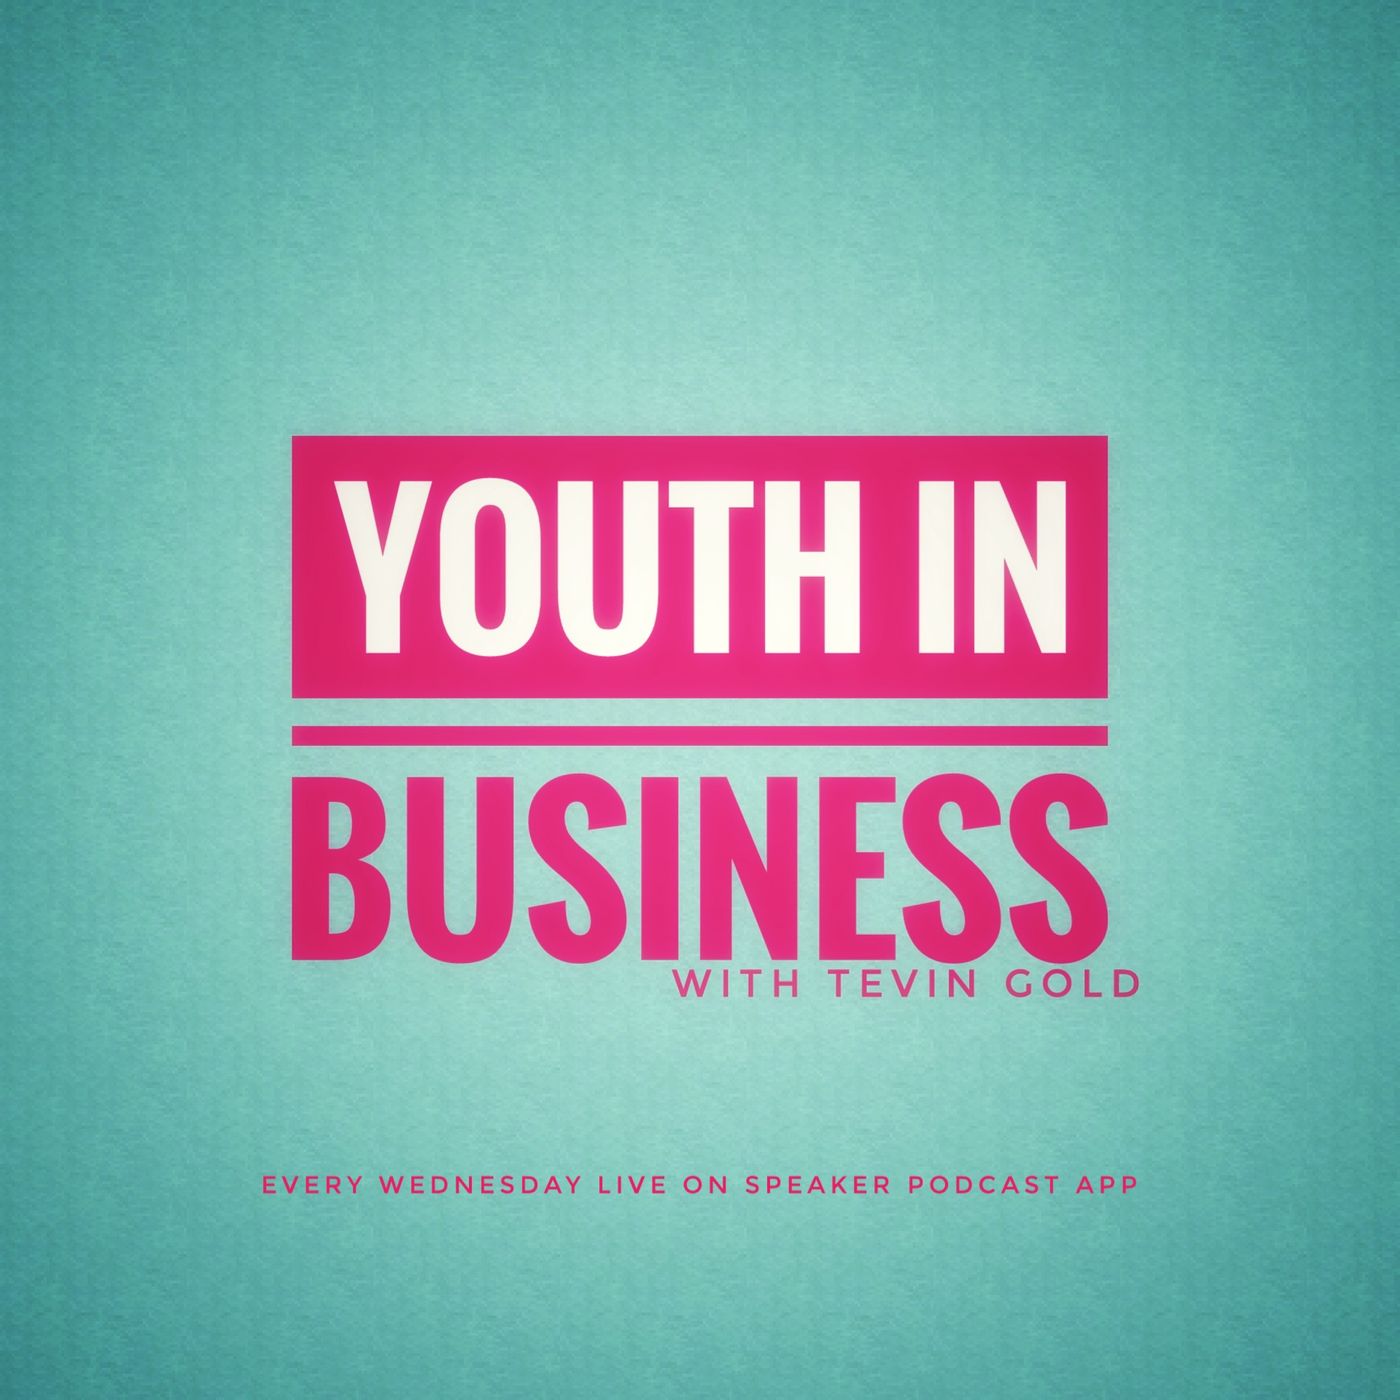 YOUTH IN BUSINESS